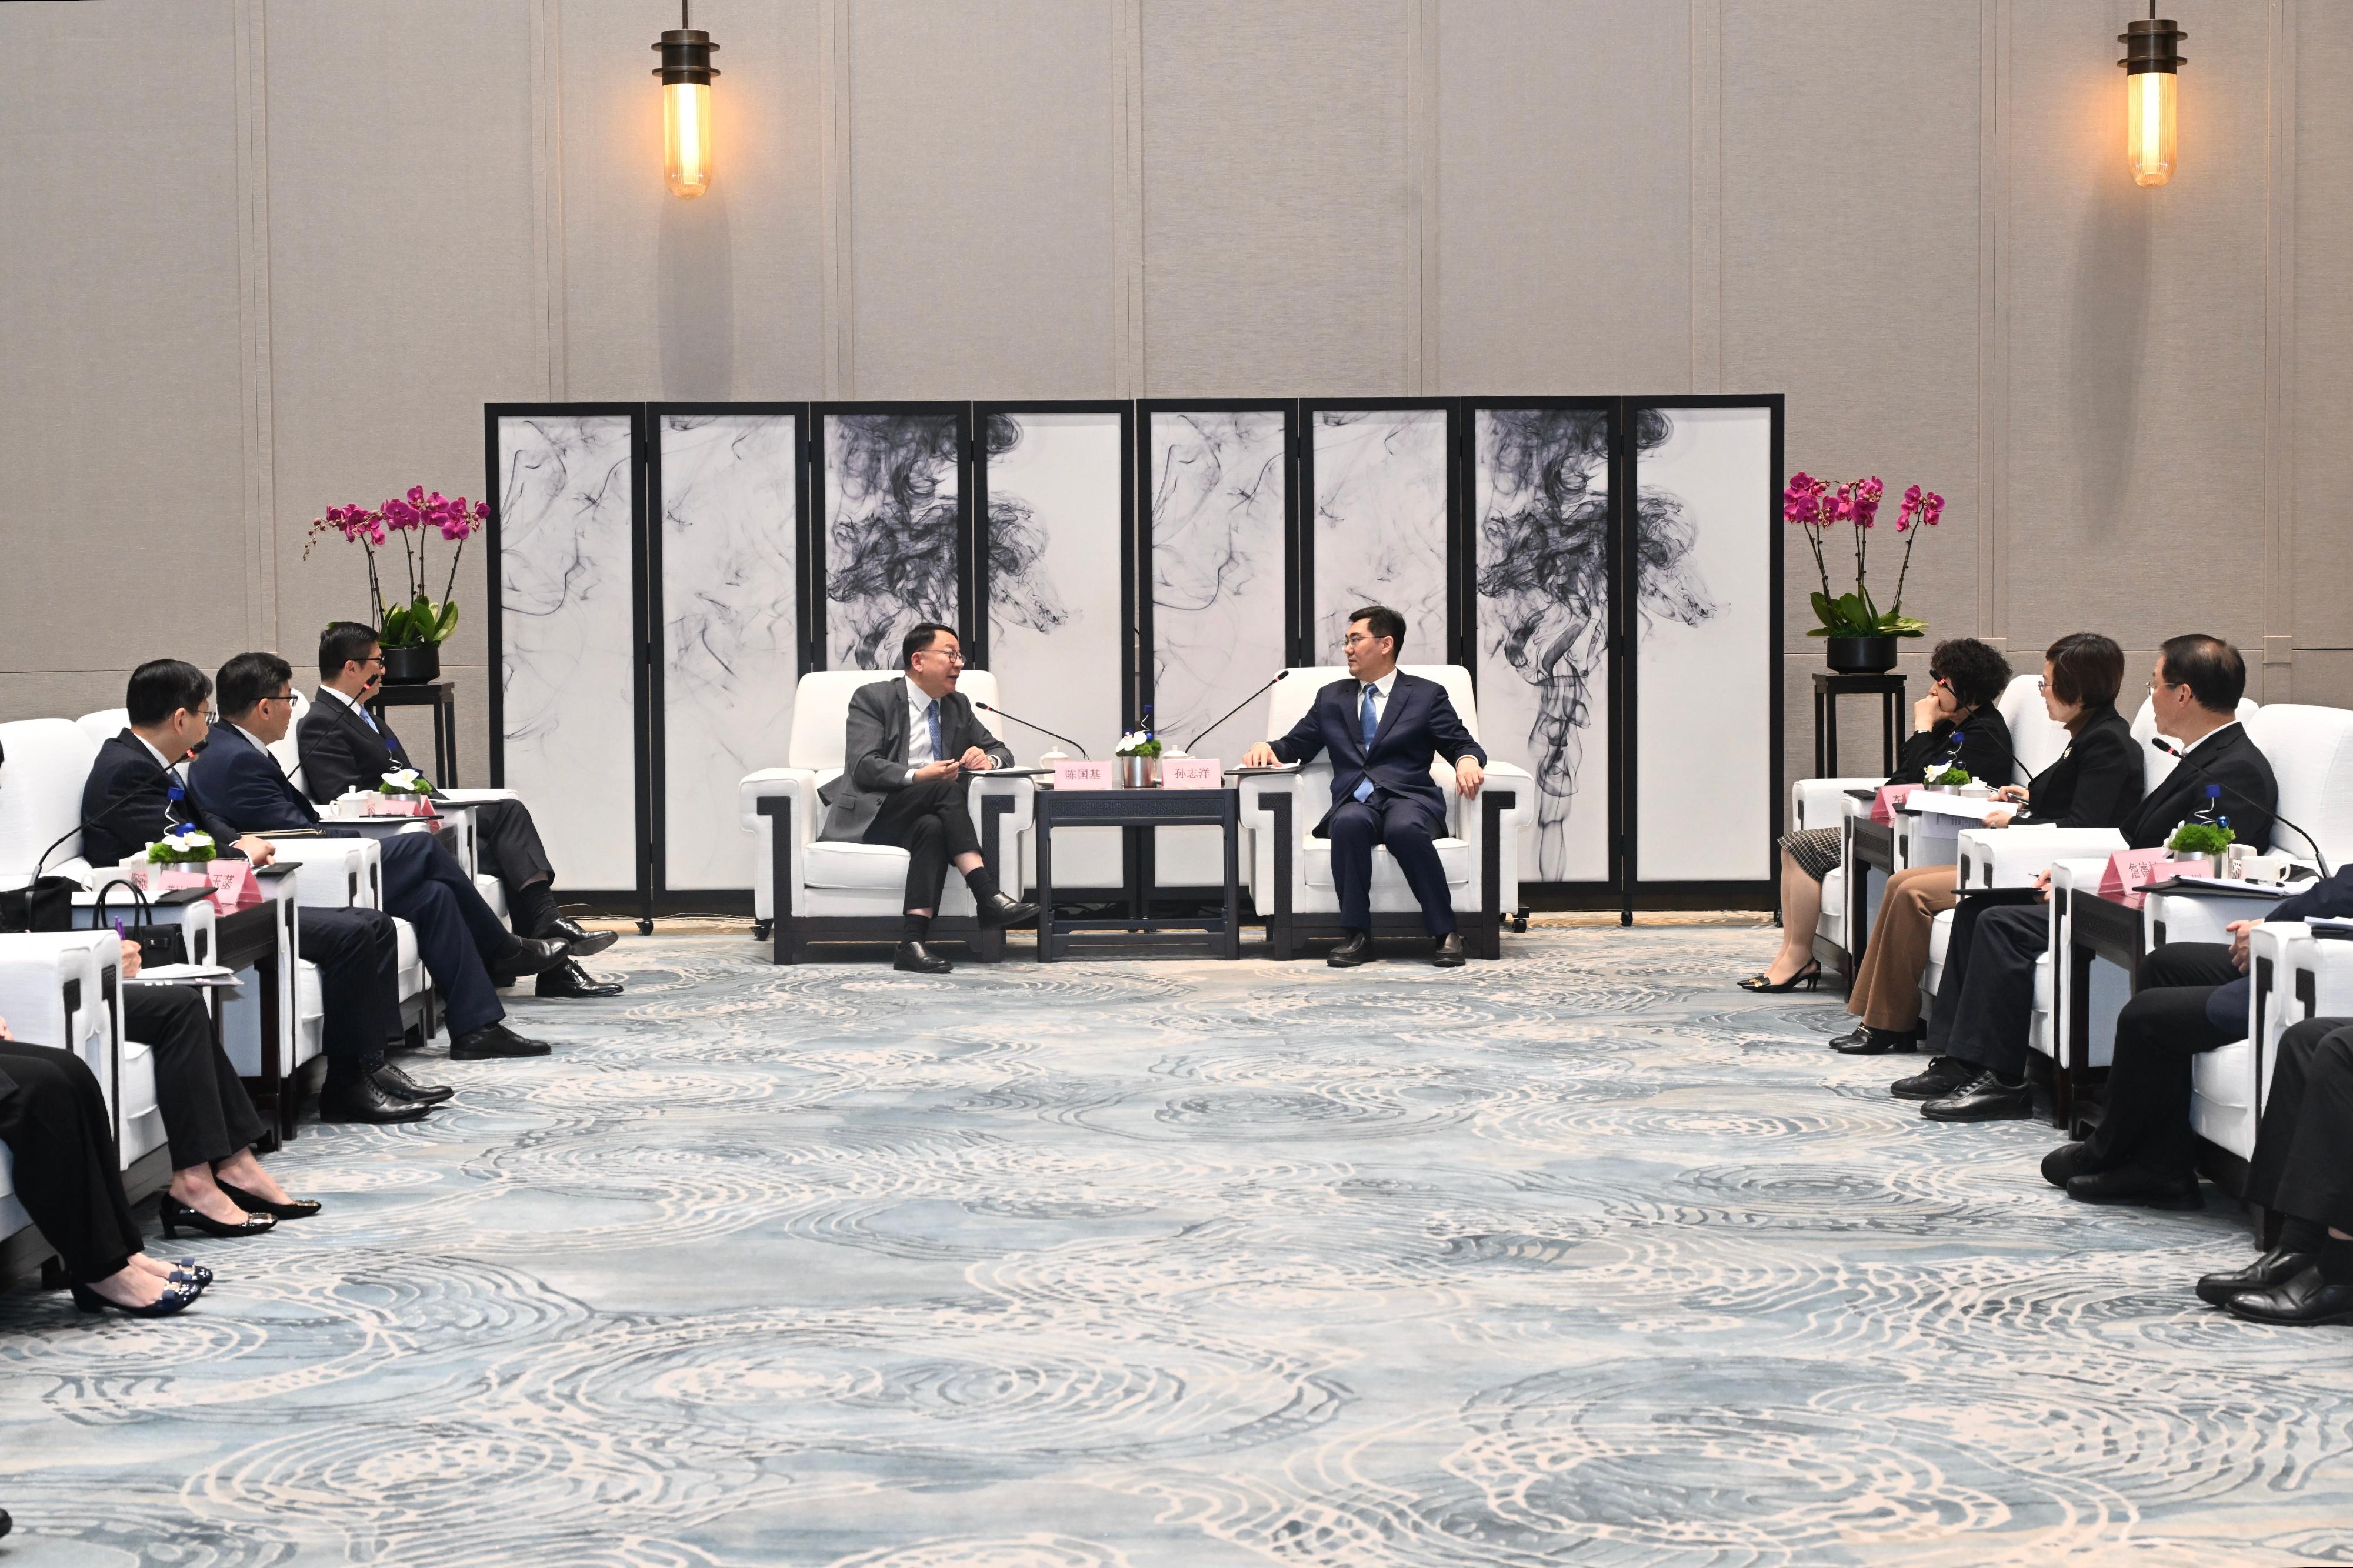 The Chief Secretary for Administration, Mr Chan Kwok-ki, arrived in Guangzhou today (January 8) to begin his visit to Mainland cities of the Guangdong-Hong Kong-Macao Greater Bay Area. Photo shows Mr Chan (fourth left) meeting the Acting Mayor of the People's Government of Guangzhou Municipality, Mr Sun Zhiyang (fifth left). Also at the meeting are the Secretary for Security, Mr Tang Ping-keung (third left); the Secretary for Transport and Logistics, Mr Lam Sai-hung (second left); and the Secretary for Labour and Welfare, Mr Chris Sun (first left).